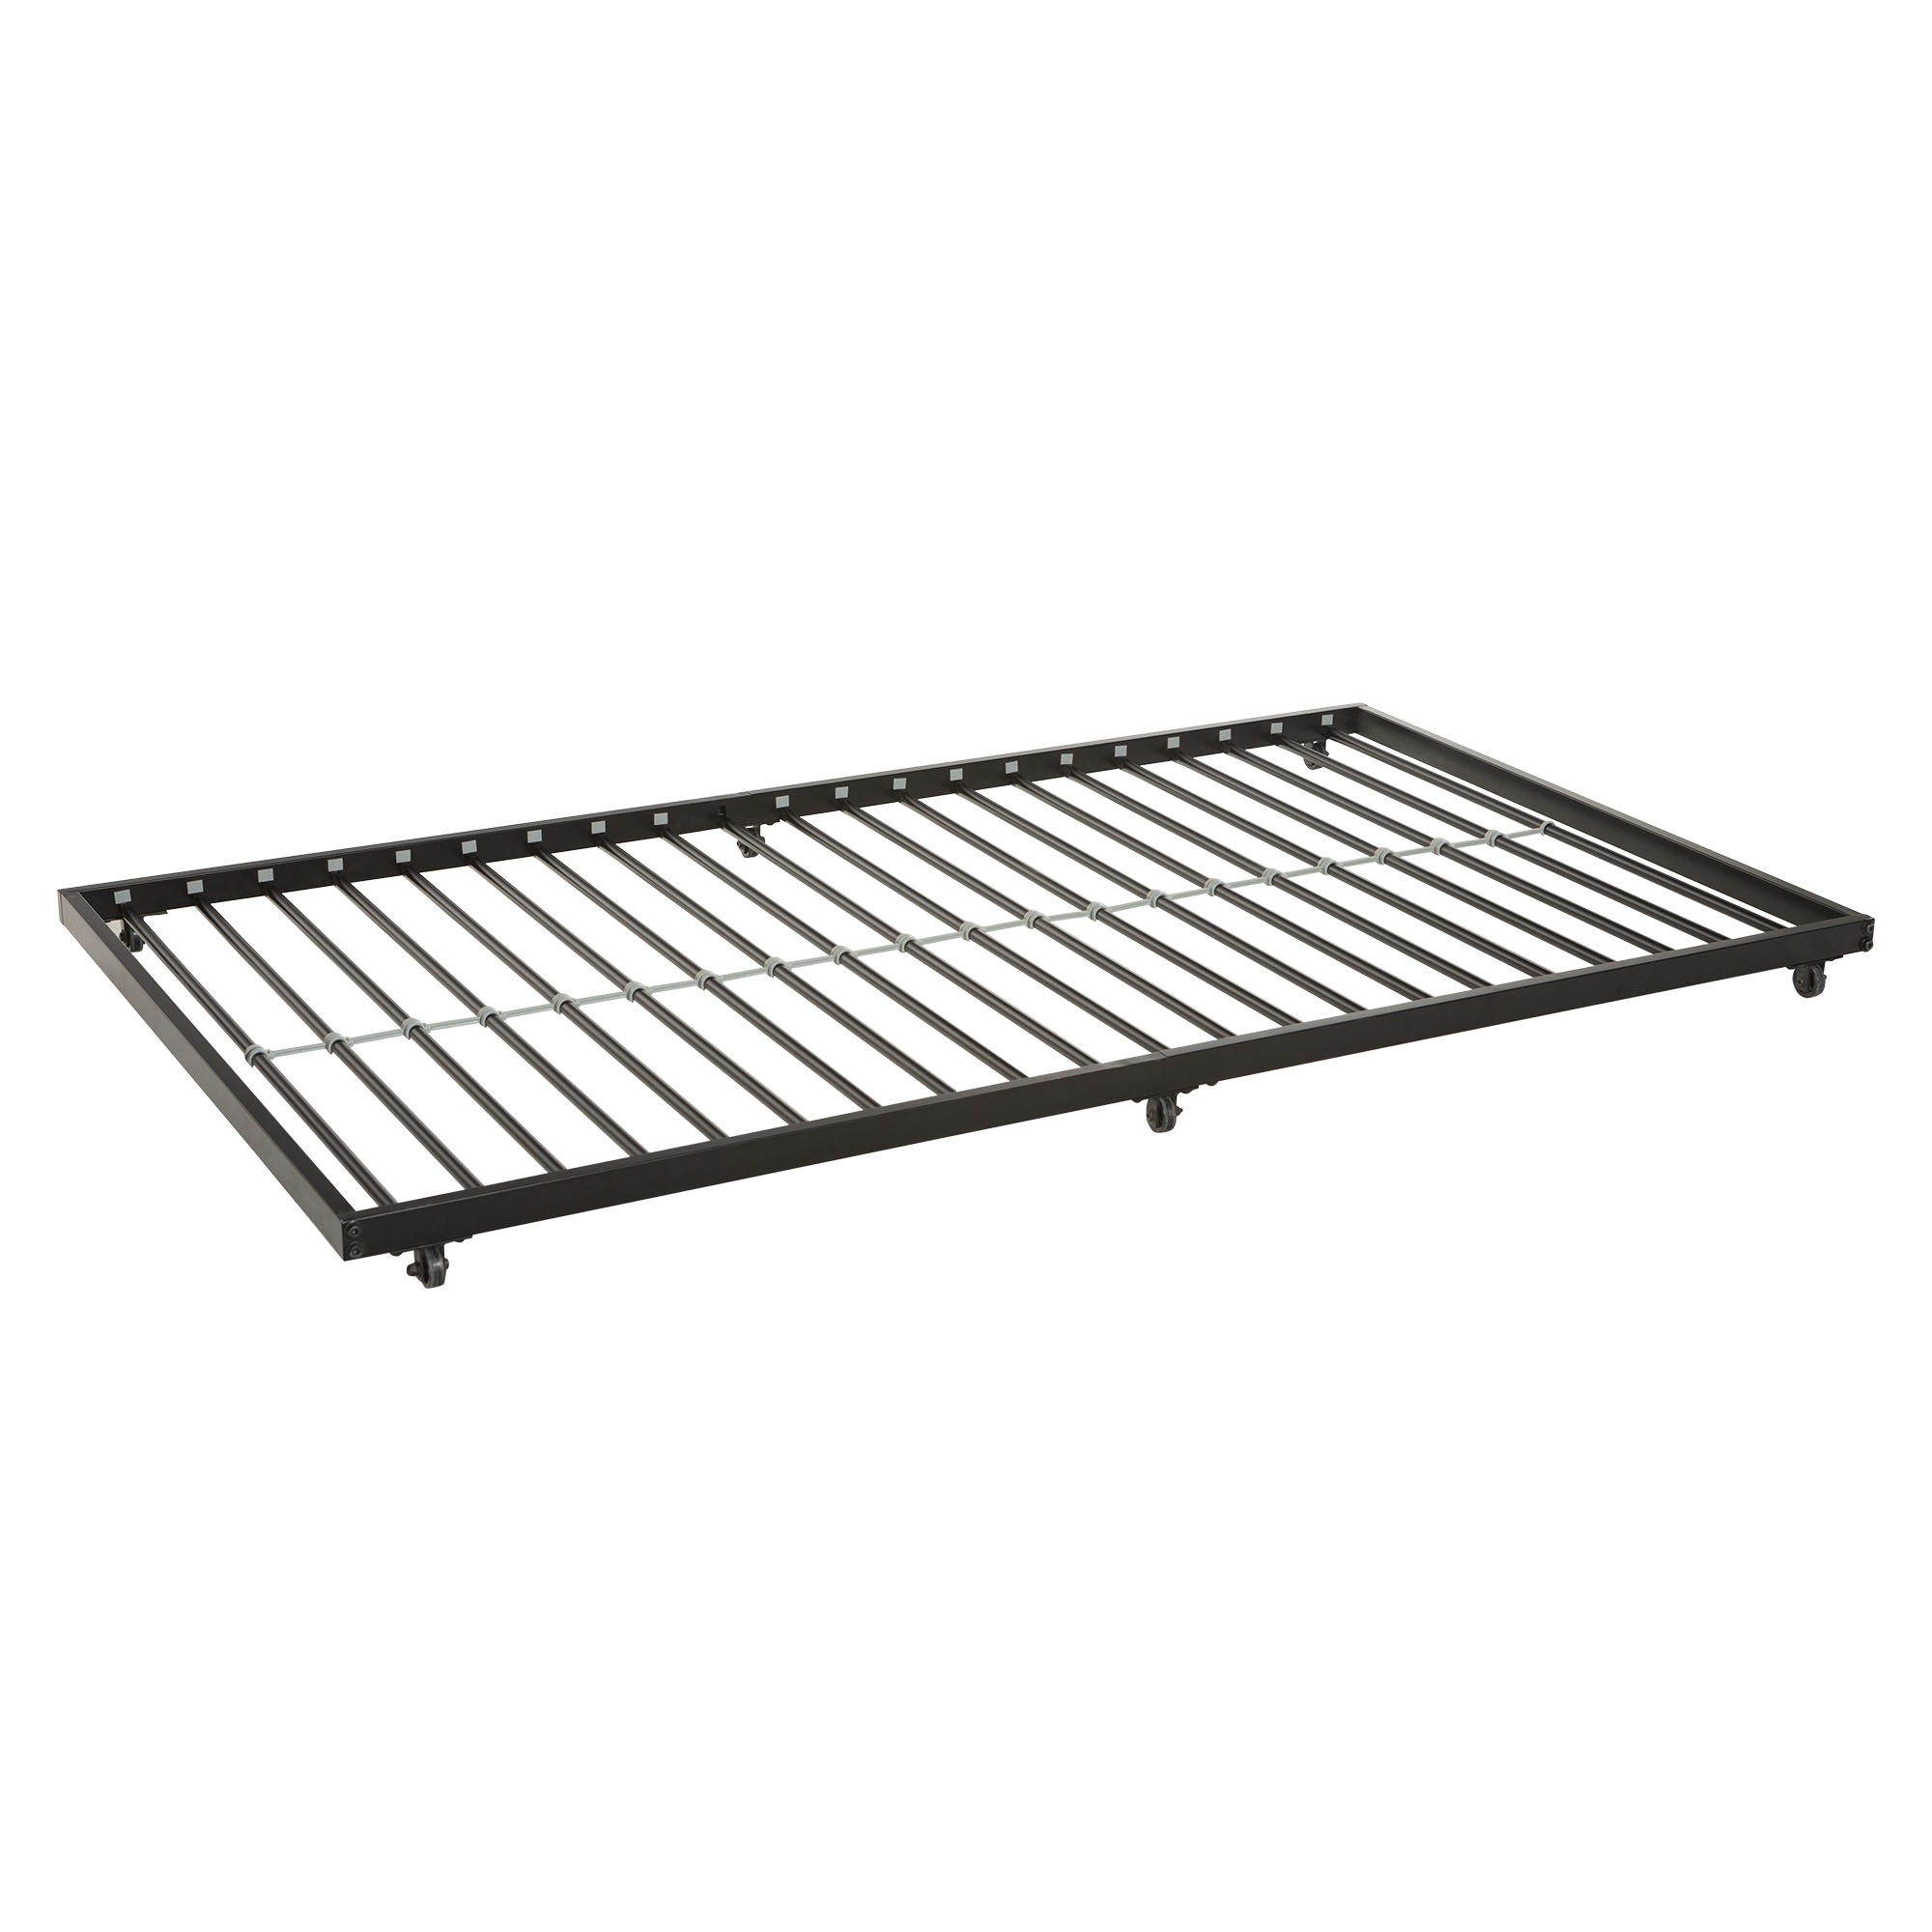 Walker Edison Twin Roll-Out Metal Trundle Bed Frame - Black - image 5 of 9